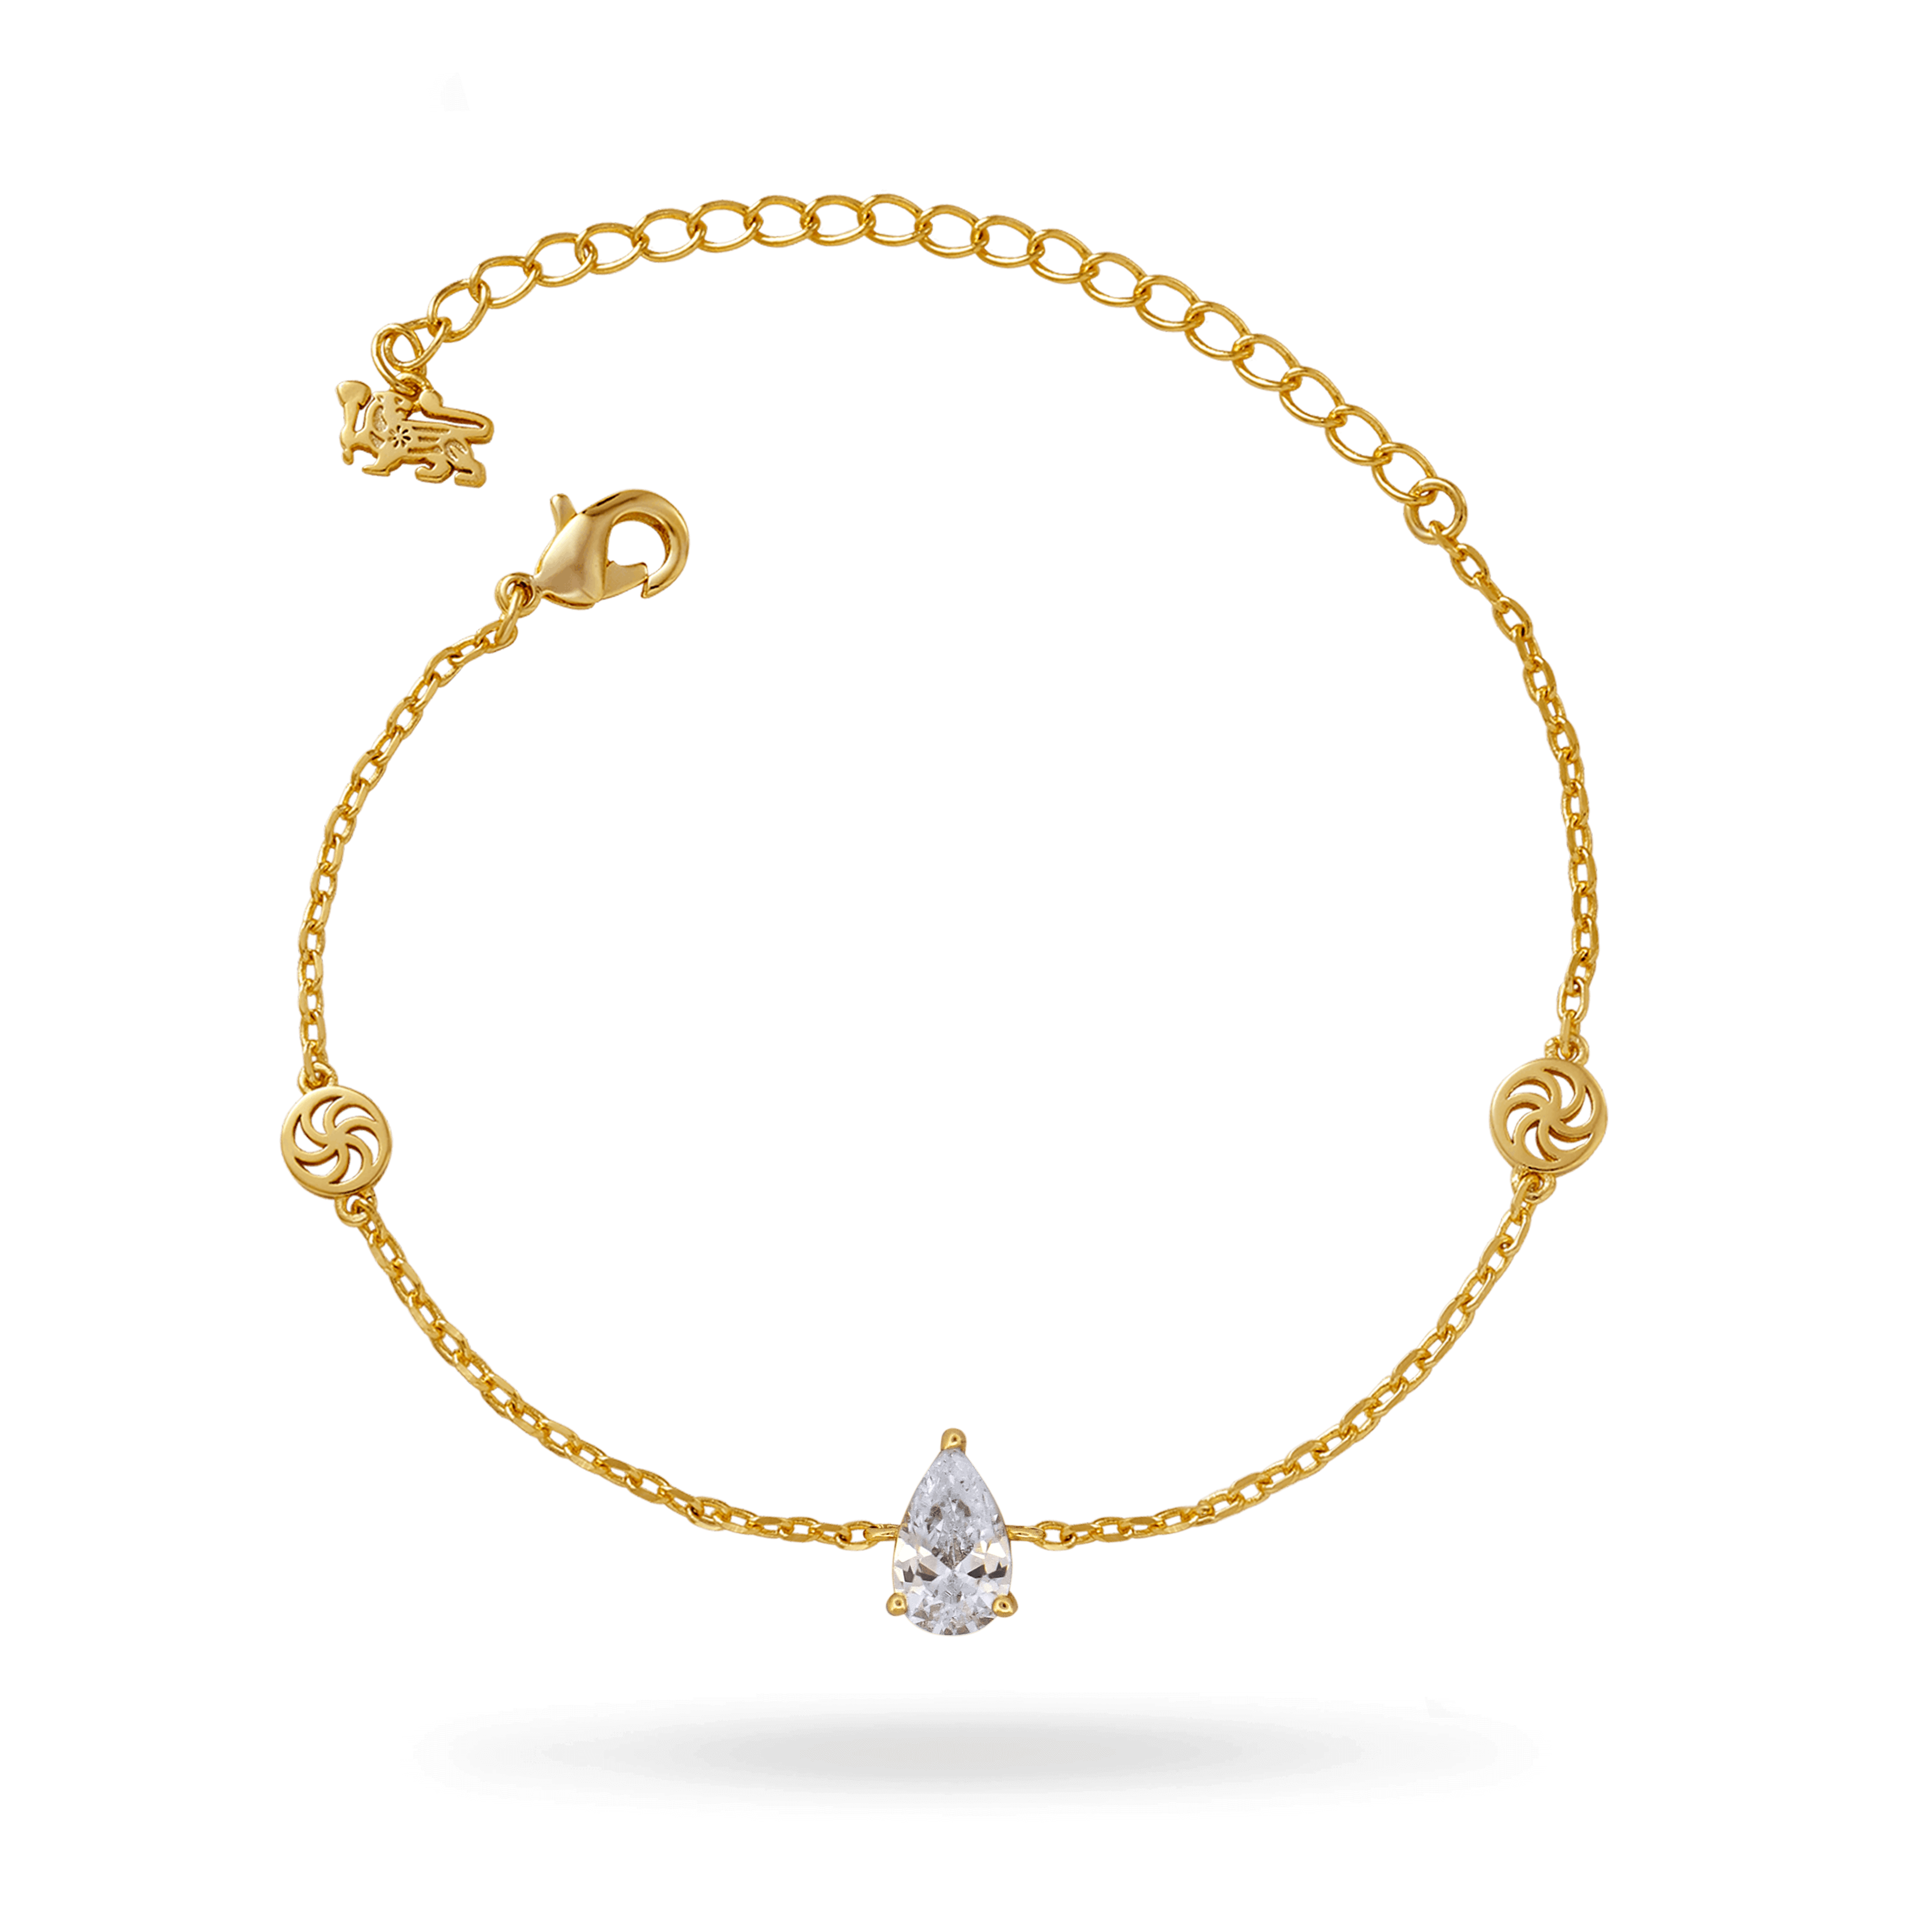 Perfect Pear Bracelet Necklaces IceLink-ATL 14K Gold Plated  